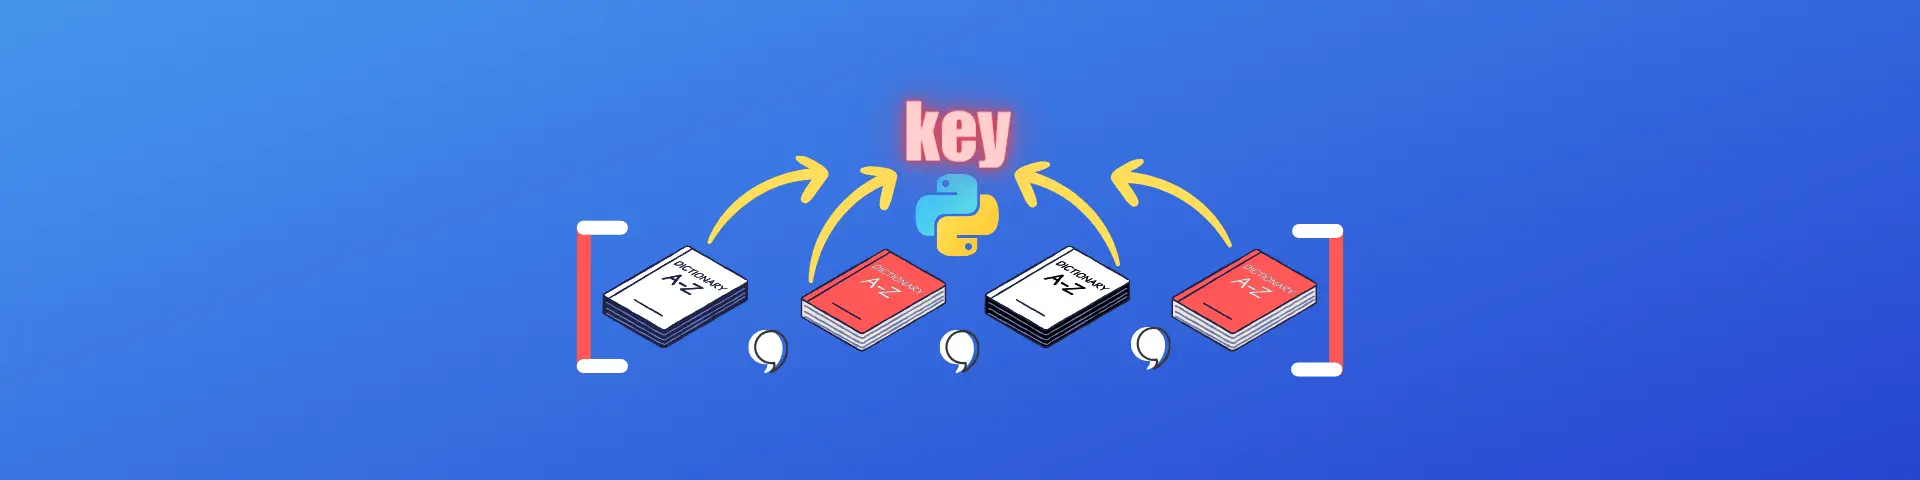 Get the Value of a Key From a List of Dictionaries With Python